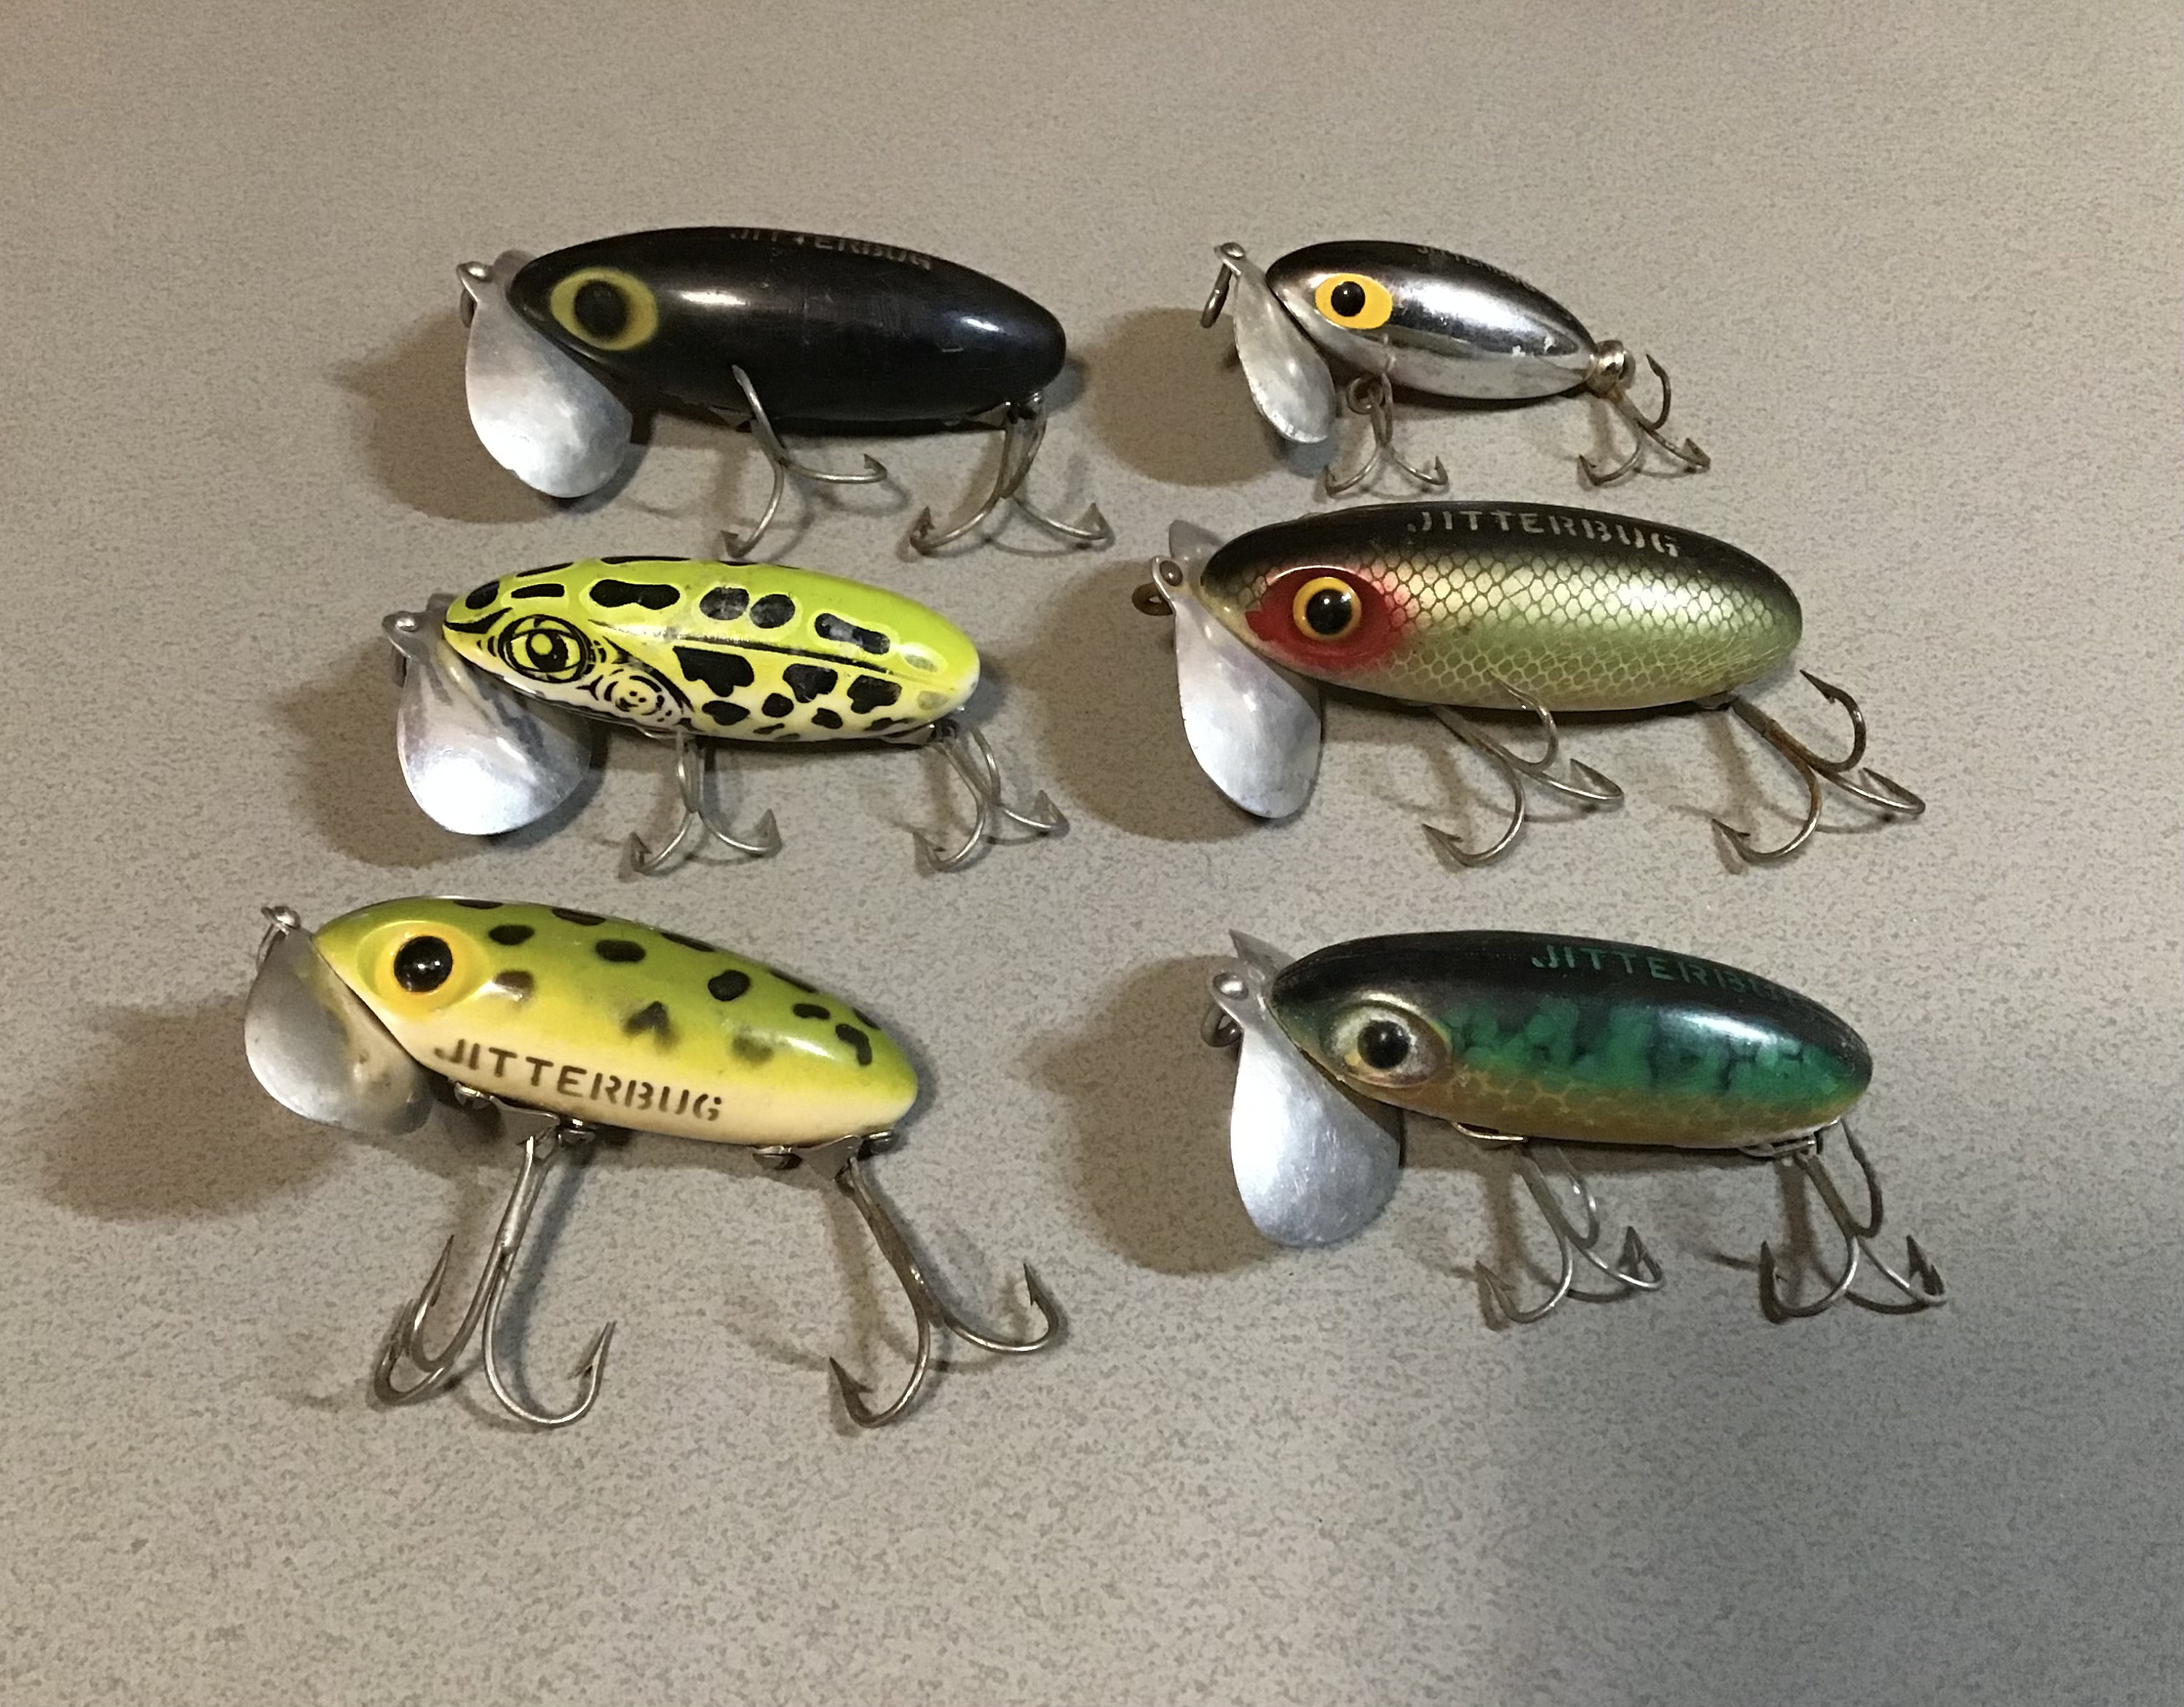 Vintage Fred Arbogast jitterbug fishing lures. Old bass tackle baits with  rare color patterns. Great display or for any avid collector